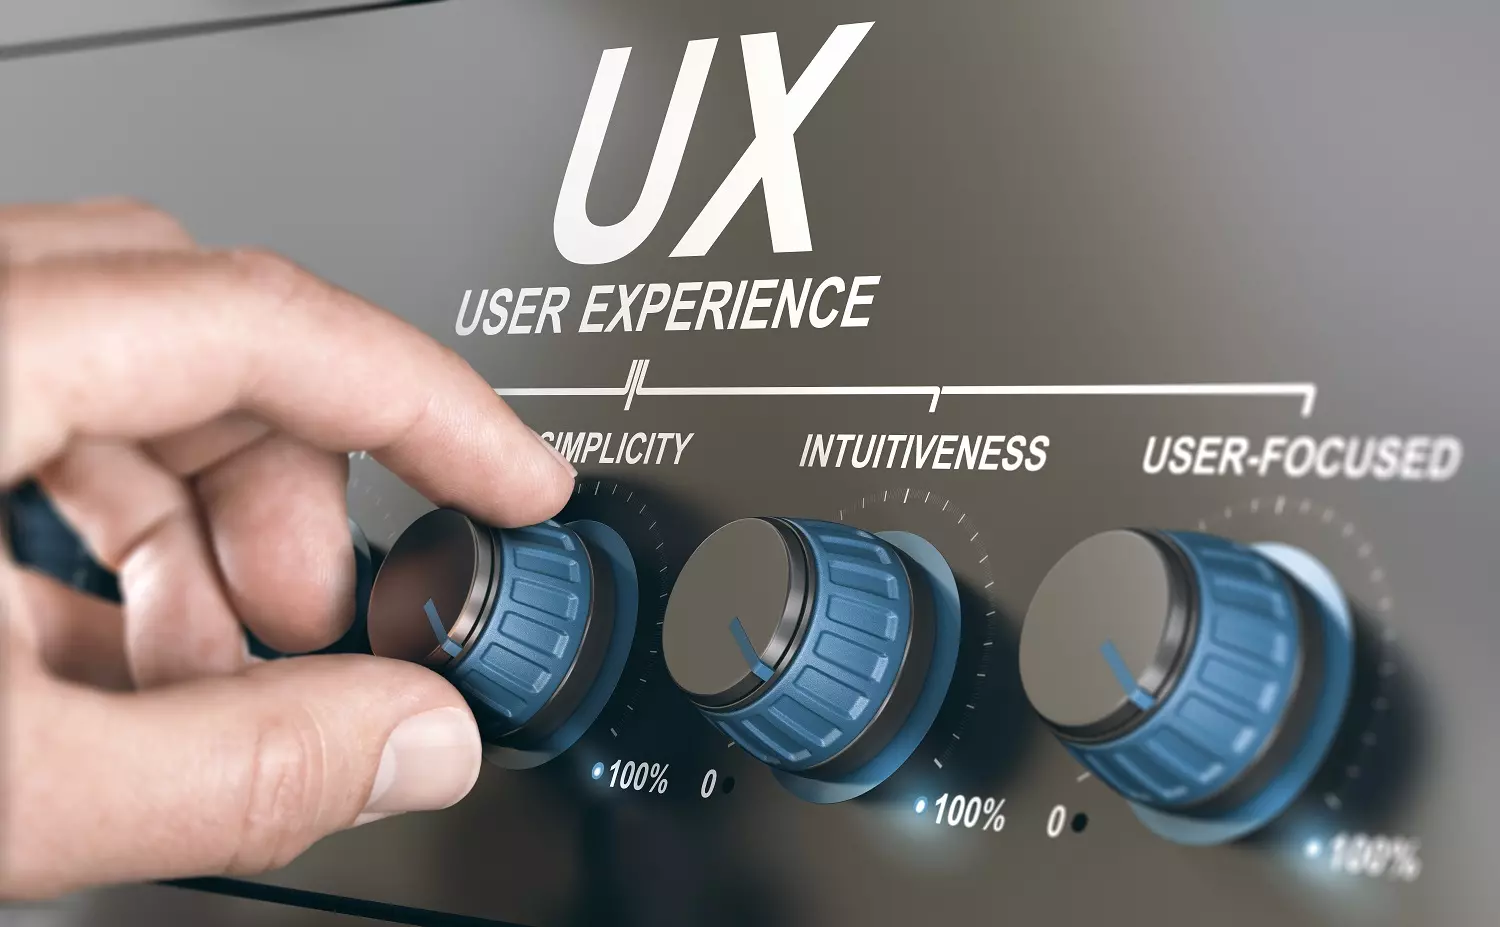 UX, User Experience, Web or App Design Concept.